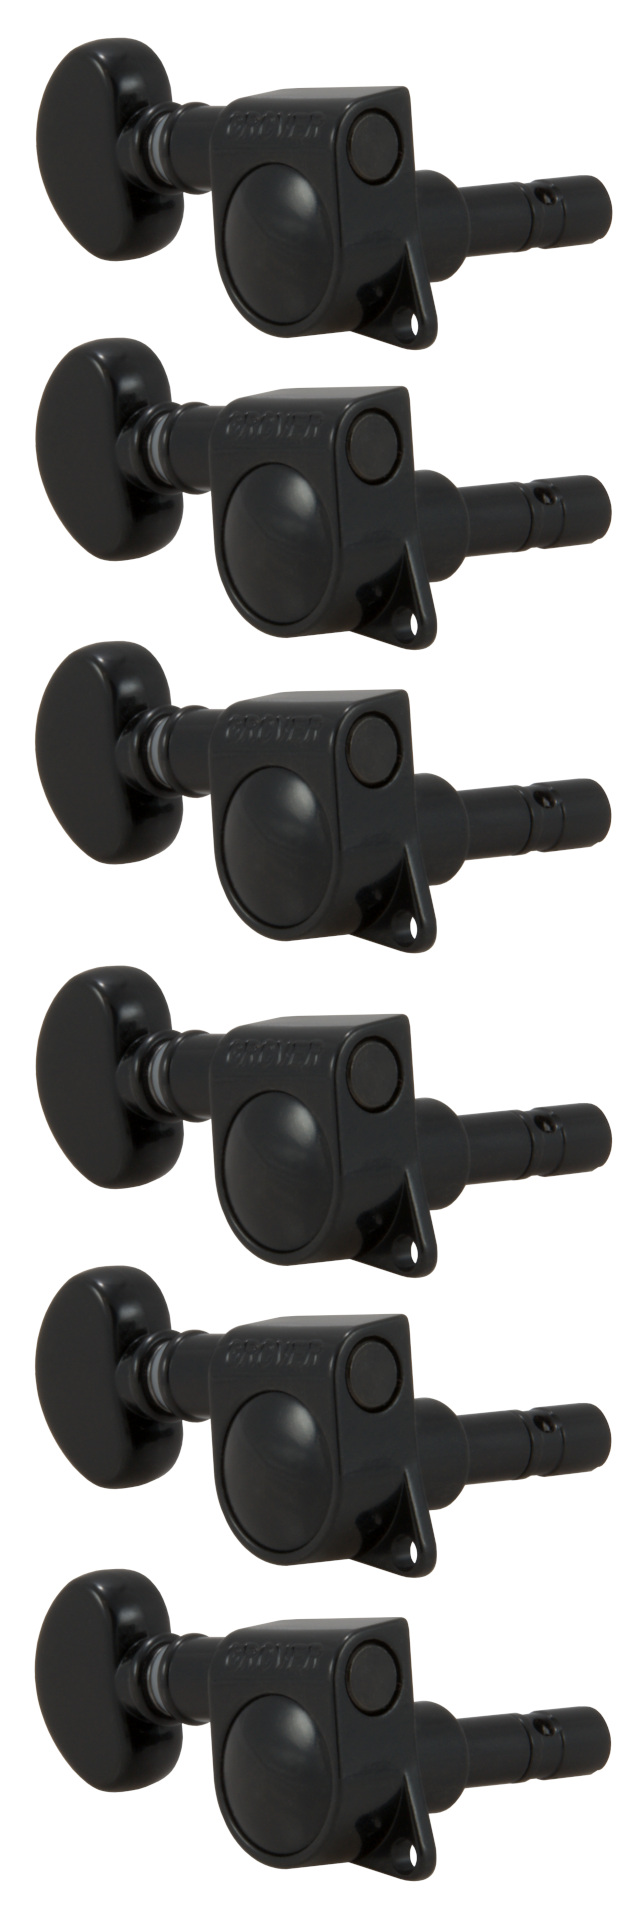 Grover 406BCL6 Mini Locking Rotomatics with Round Button - Guitar Machine Heads, 6-in-Line, Lefthand, Treble Side (Right) - Black Chrome